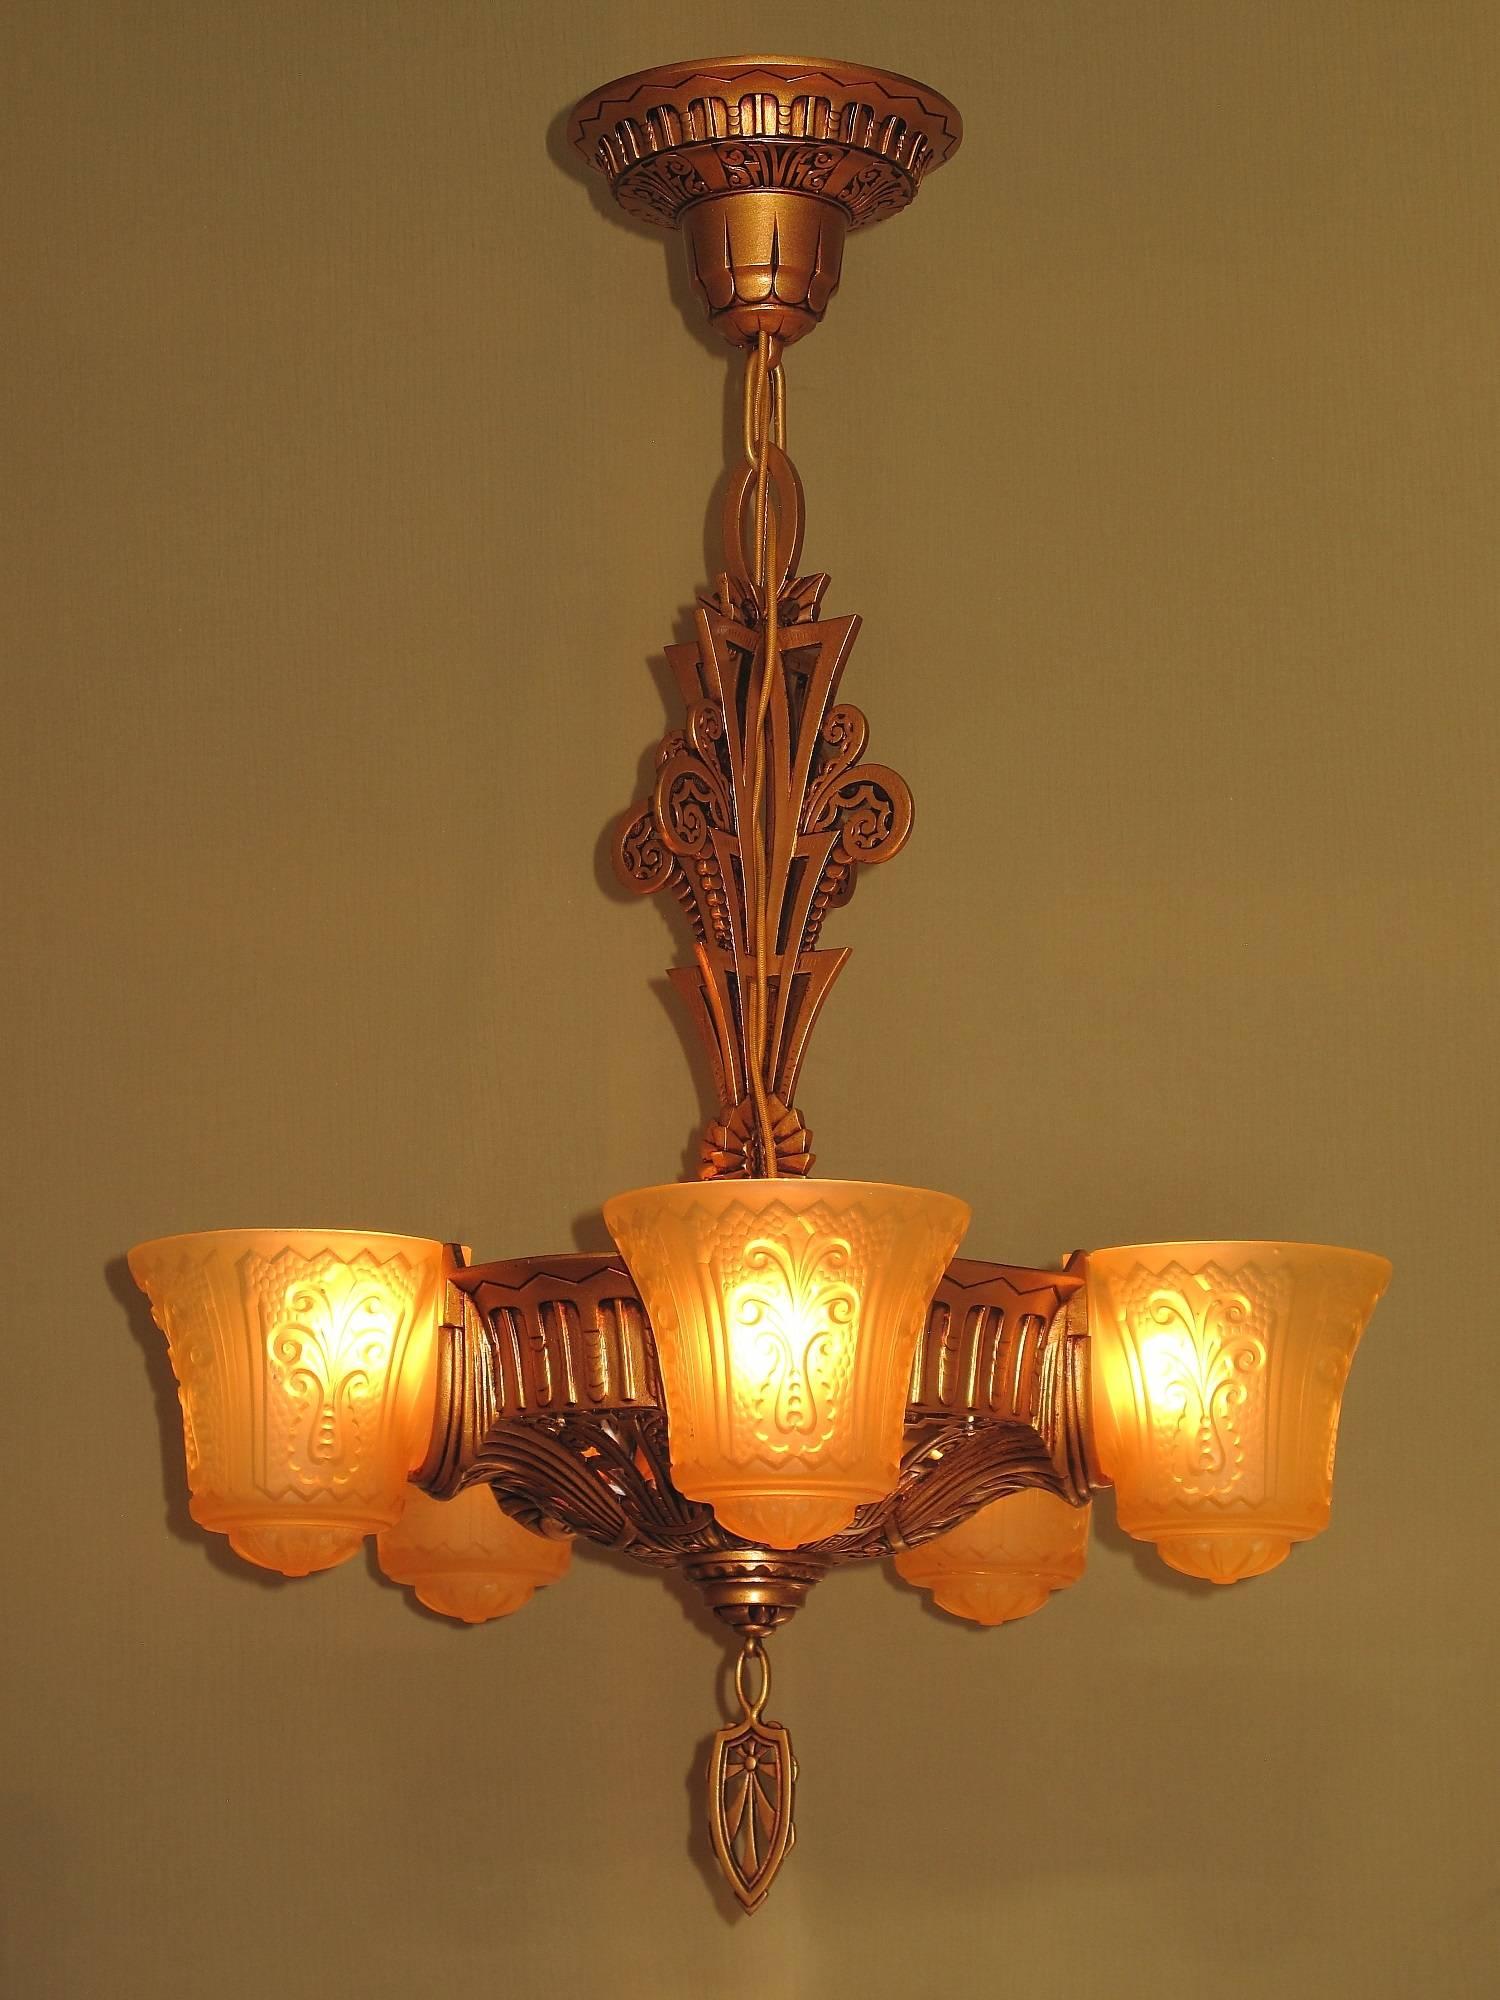 Painted Beardslee Slip Shade Fixture Antique Golden with Amber Shades For Sale